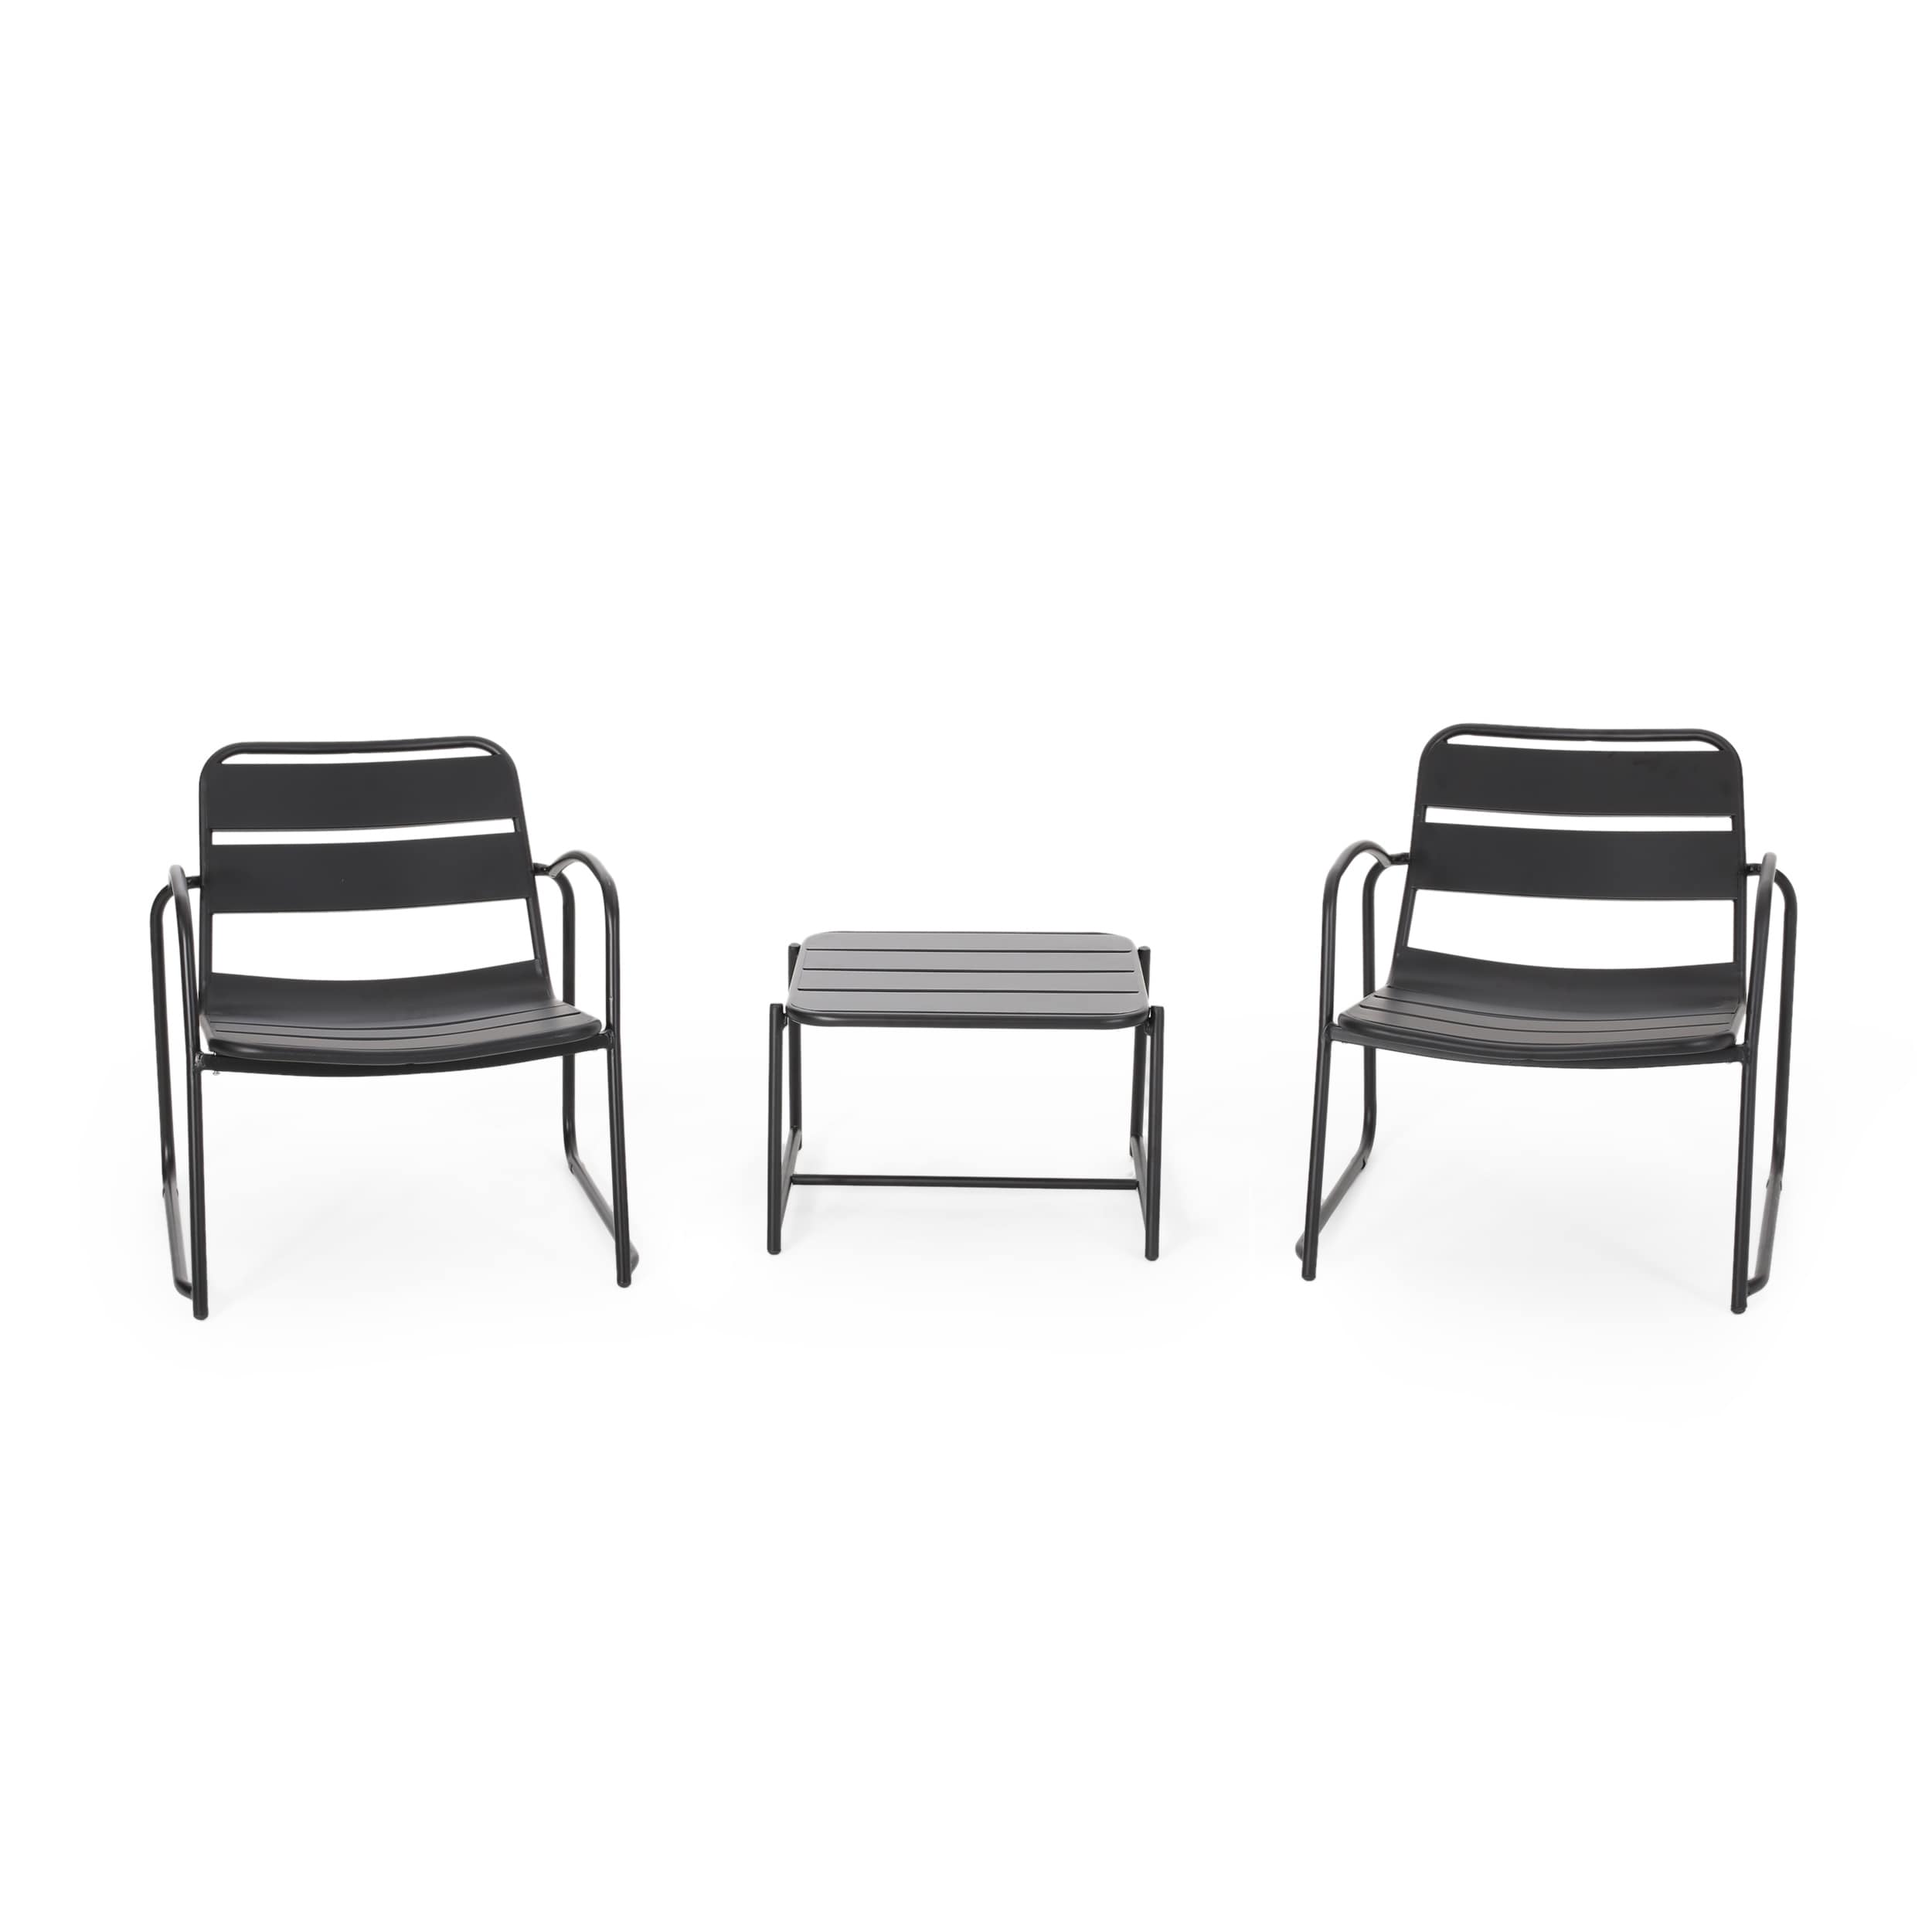 Cowan Outdoor Modern 2 Seater Chat Set By Christopher Knight Home